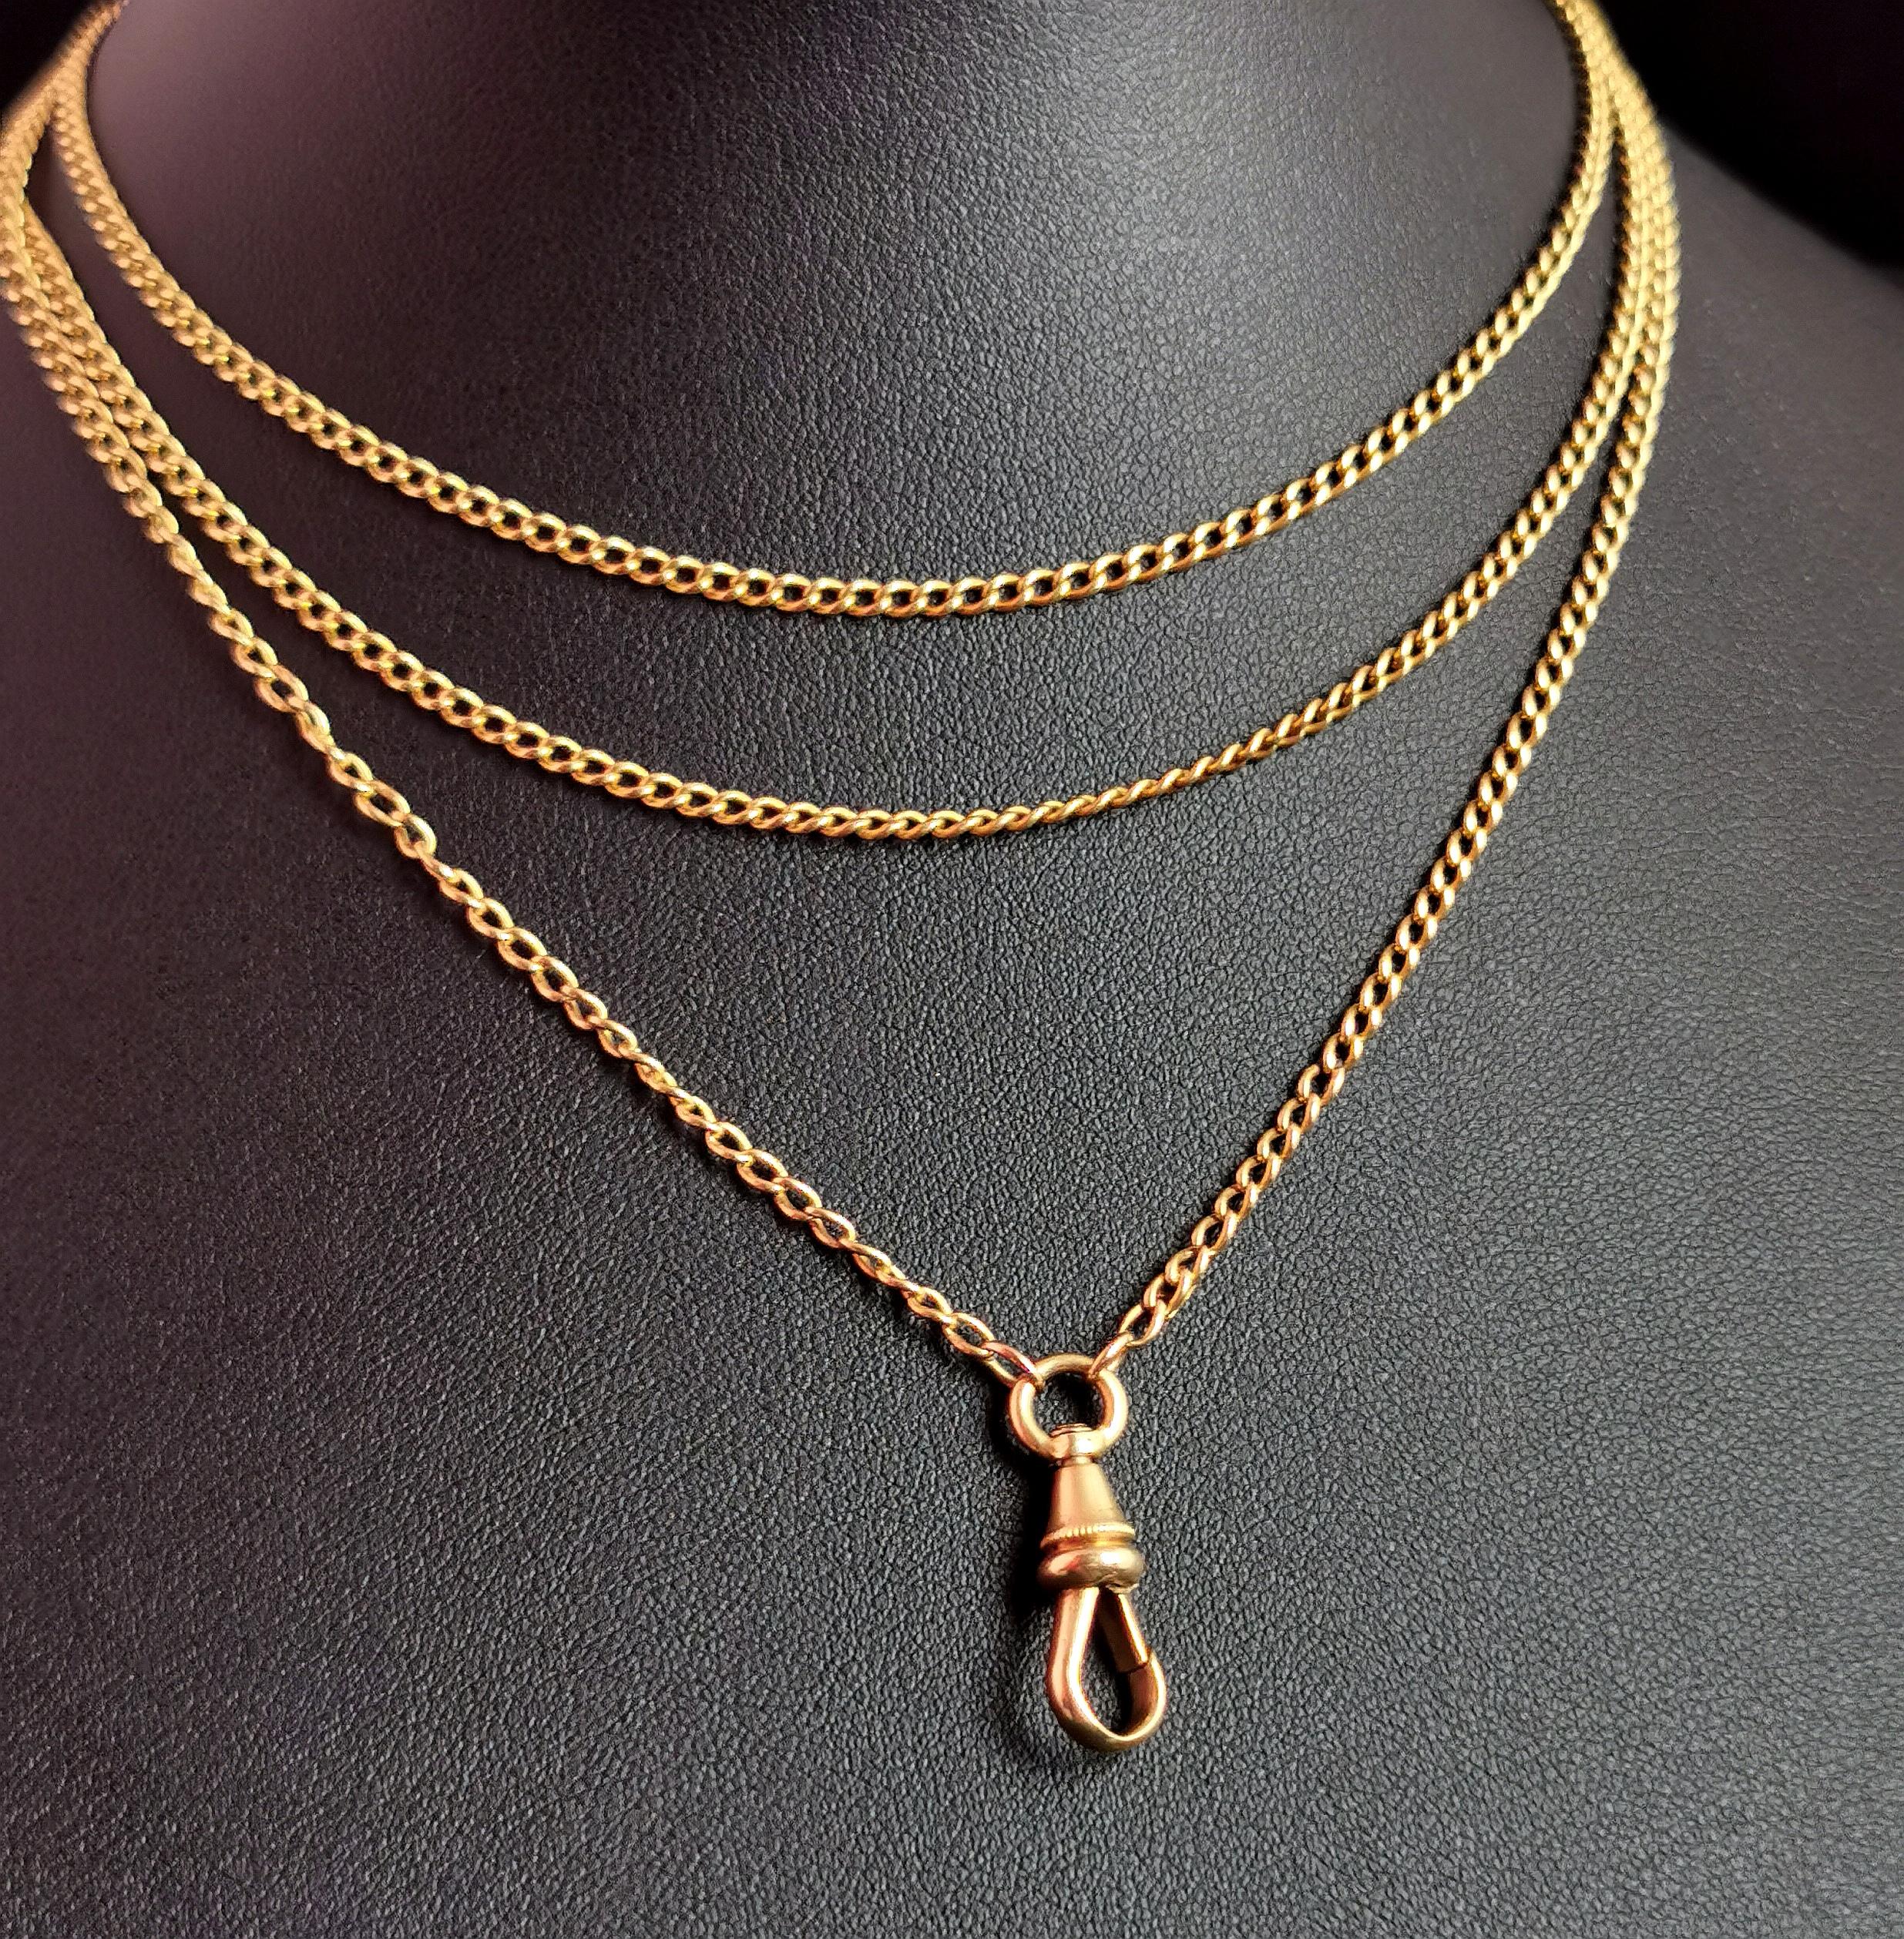 Antique 18k Yellow Gold Longuard Chain Necklace, Victorian 9